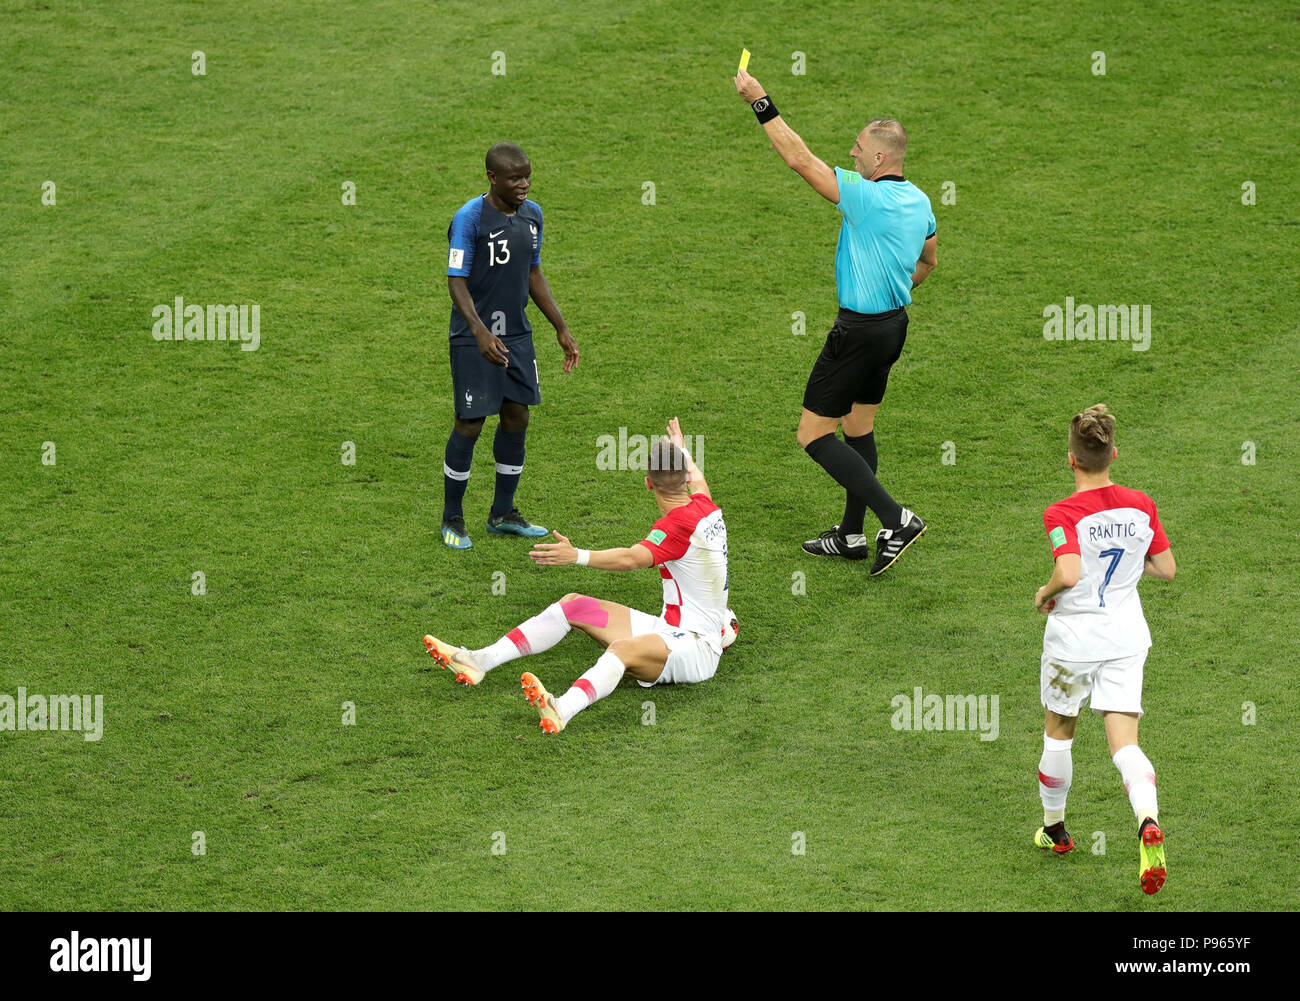 France's N'Golo Kante (top left) is shown a yellow card by match referee Nestor Pitana during the FIFA World Cup Final at the Luzhniki Stadium, Moscow. Stock Photo